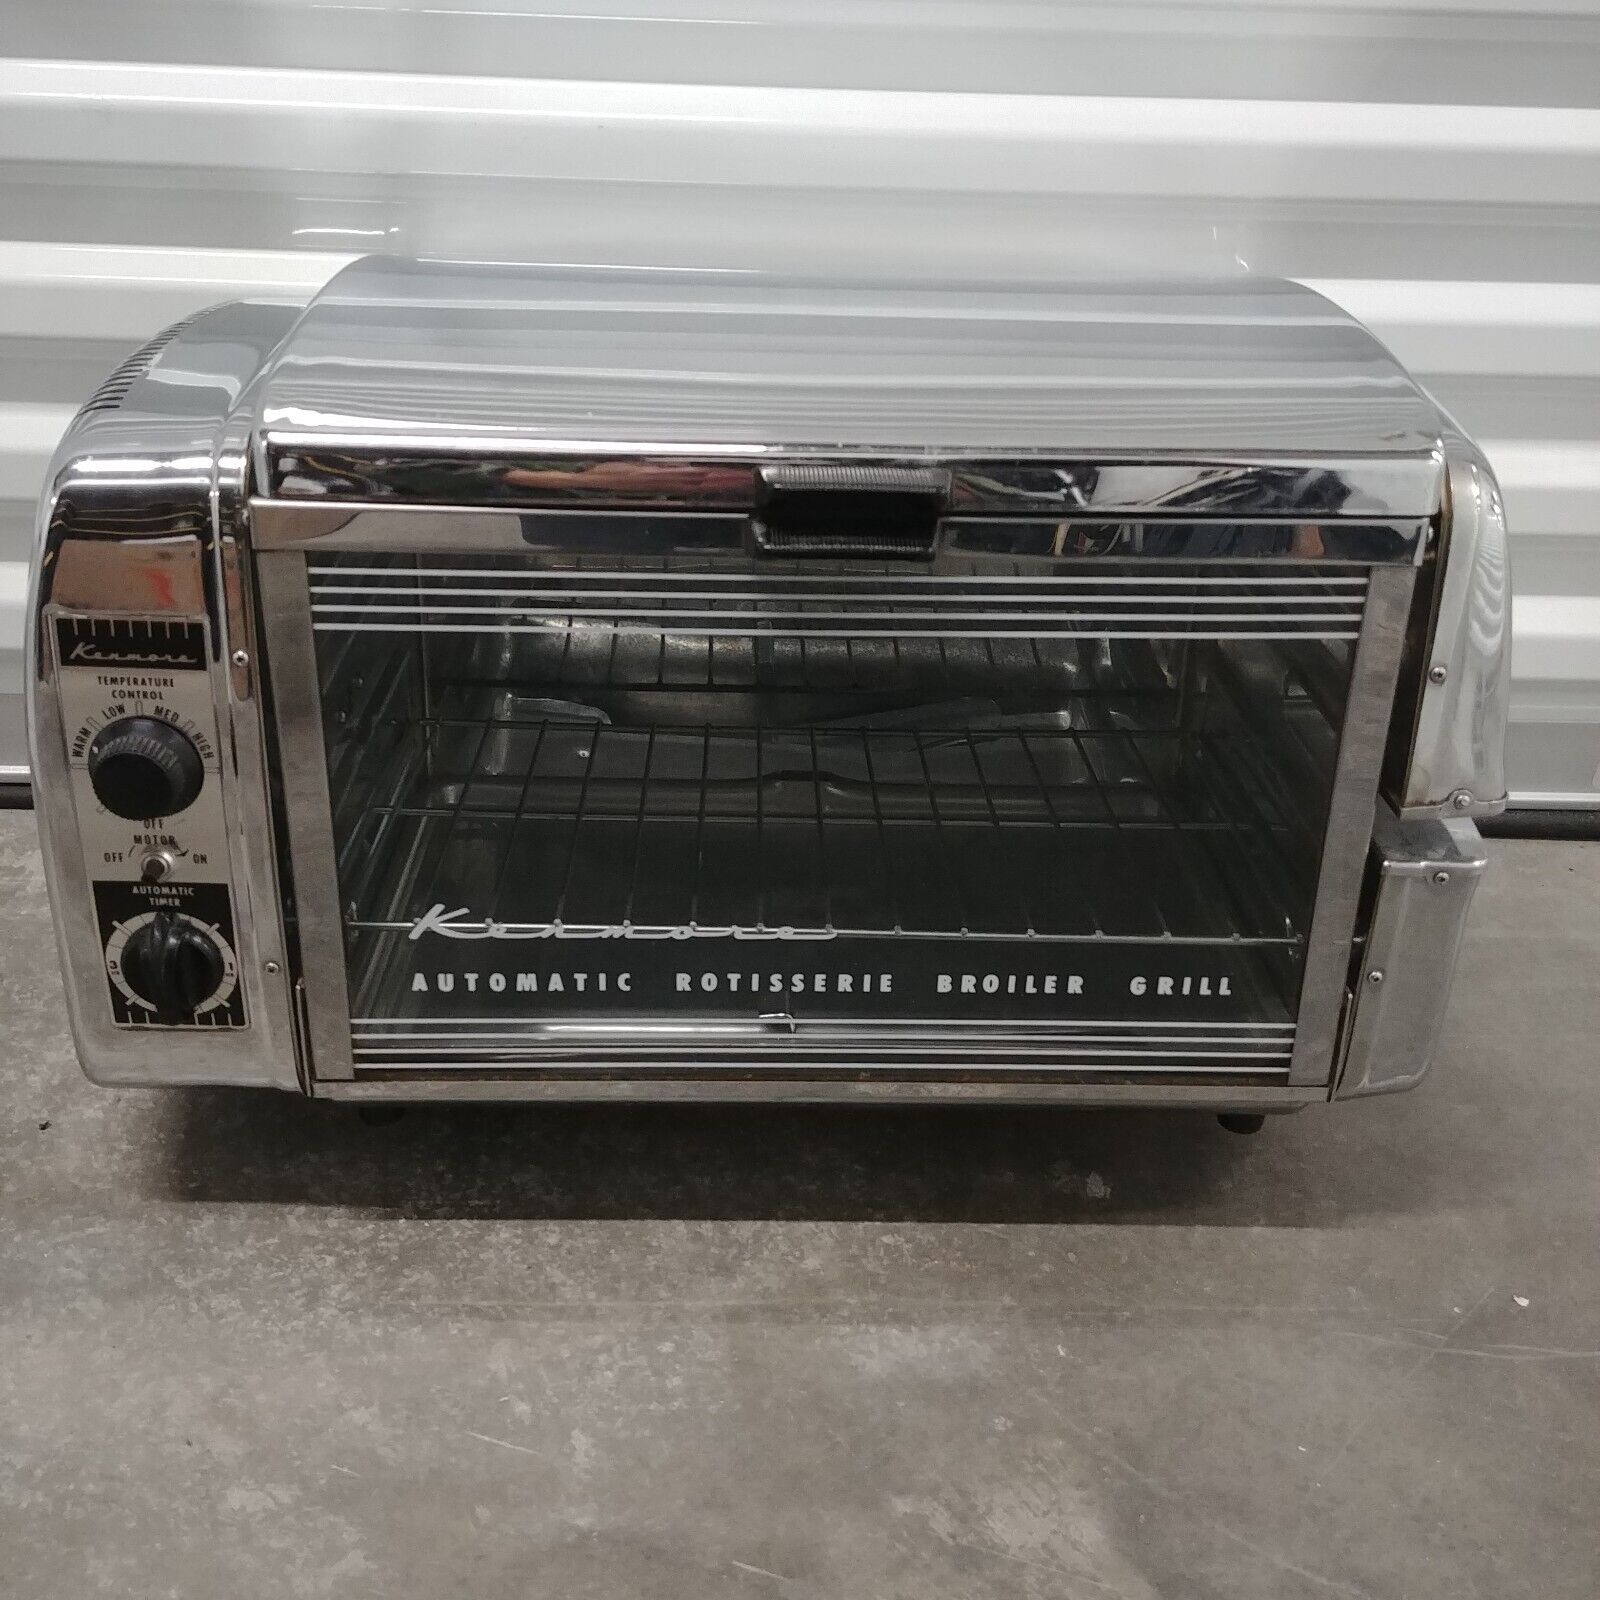 Vintage 1950s Kenmore Oven Baker Automatic Rotisserie Retro Kitchen Chrome Grill